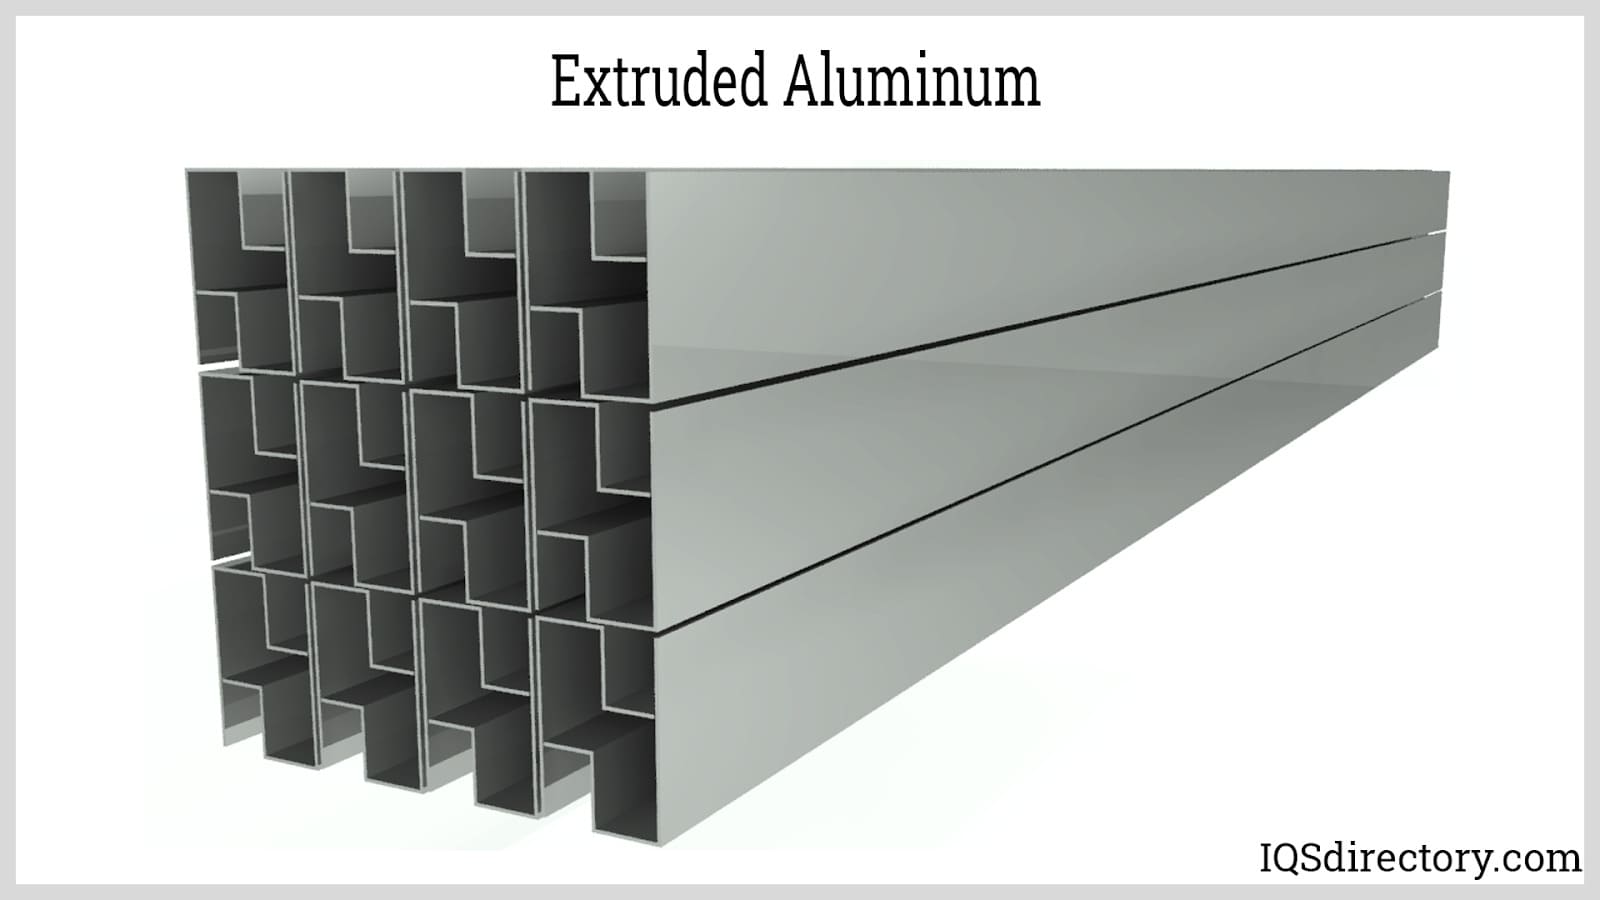 T-slot Aluminum Extrusions Vs. Pipes and Joints